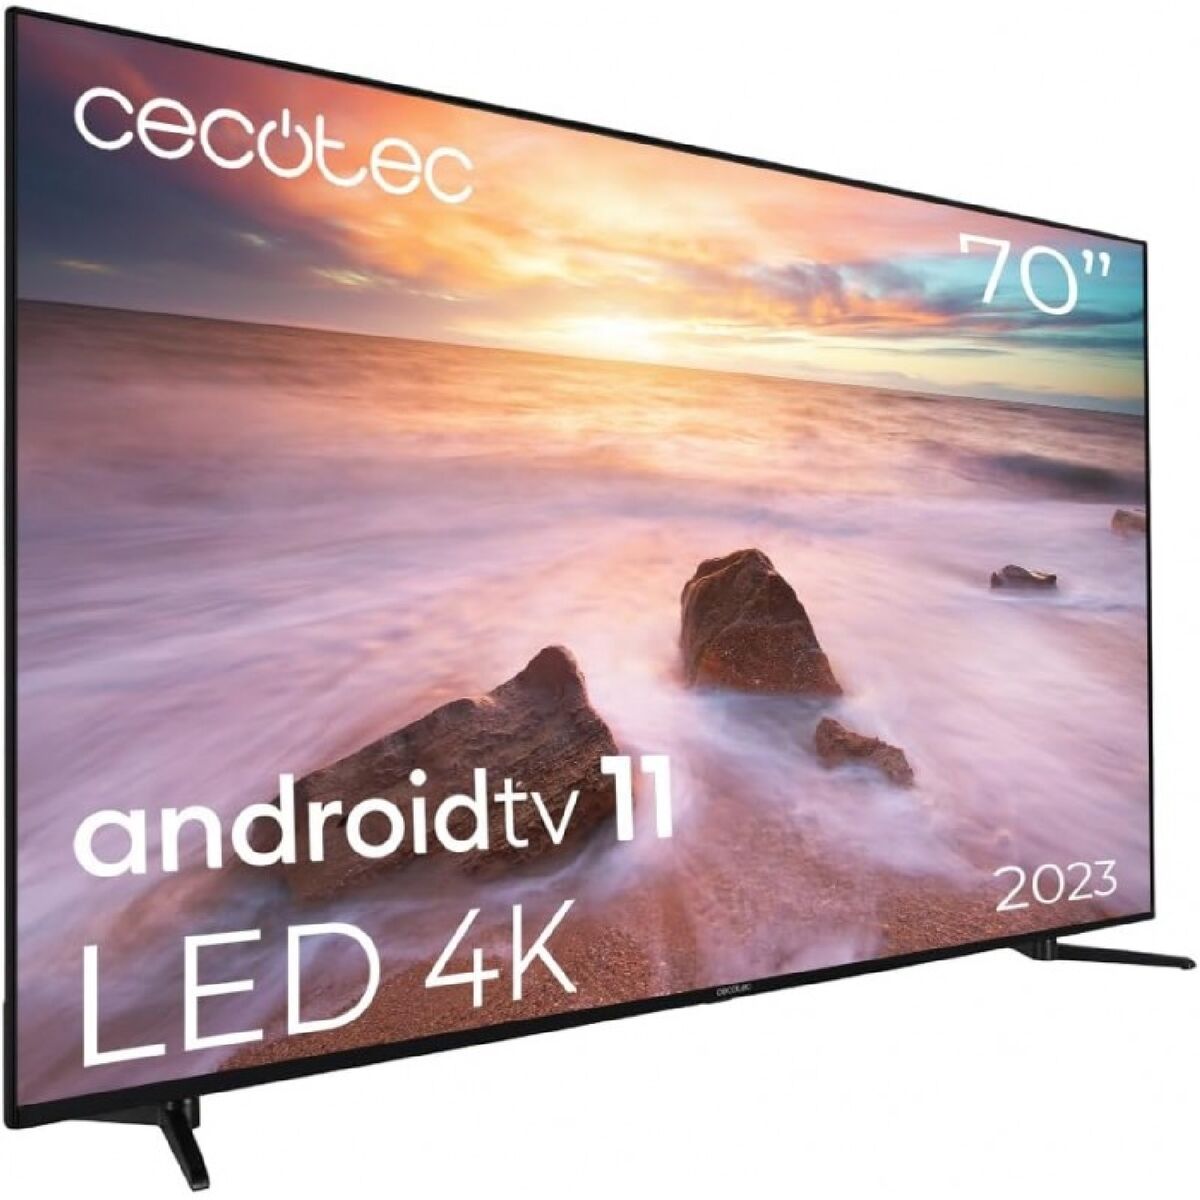 Smart TV Cecotec A2 series ALU20070 4K Ultra HD 70" LED HDR10 Dolby Vision